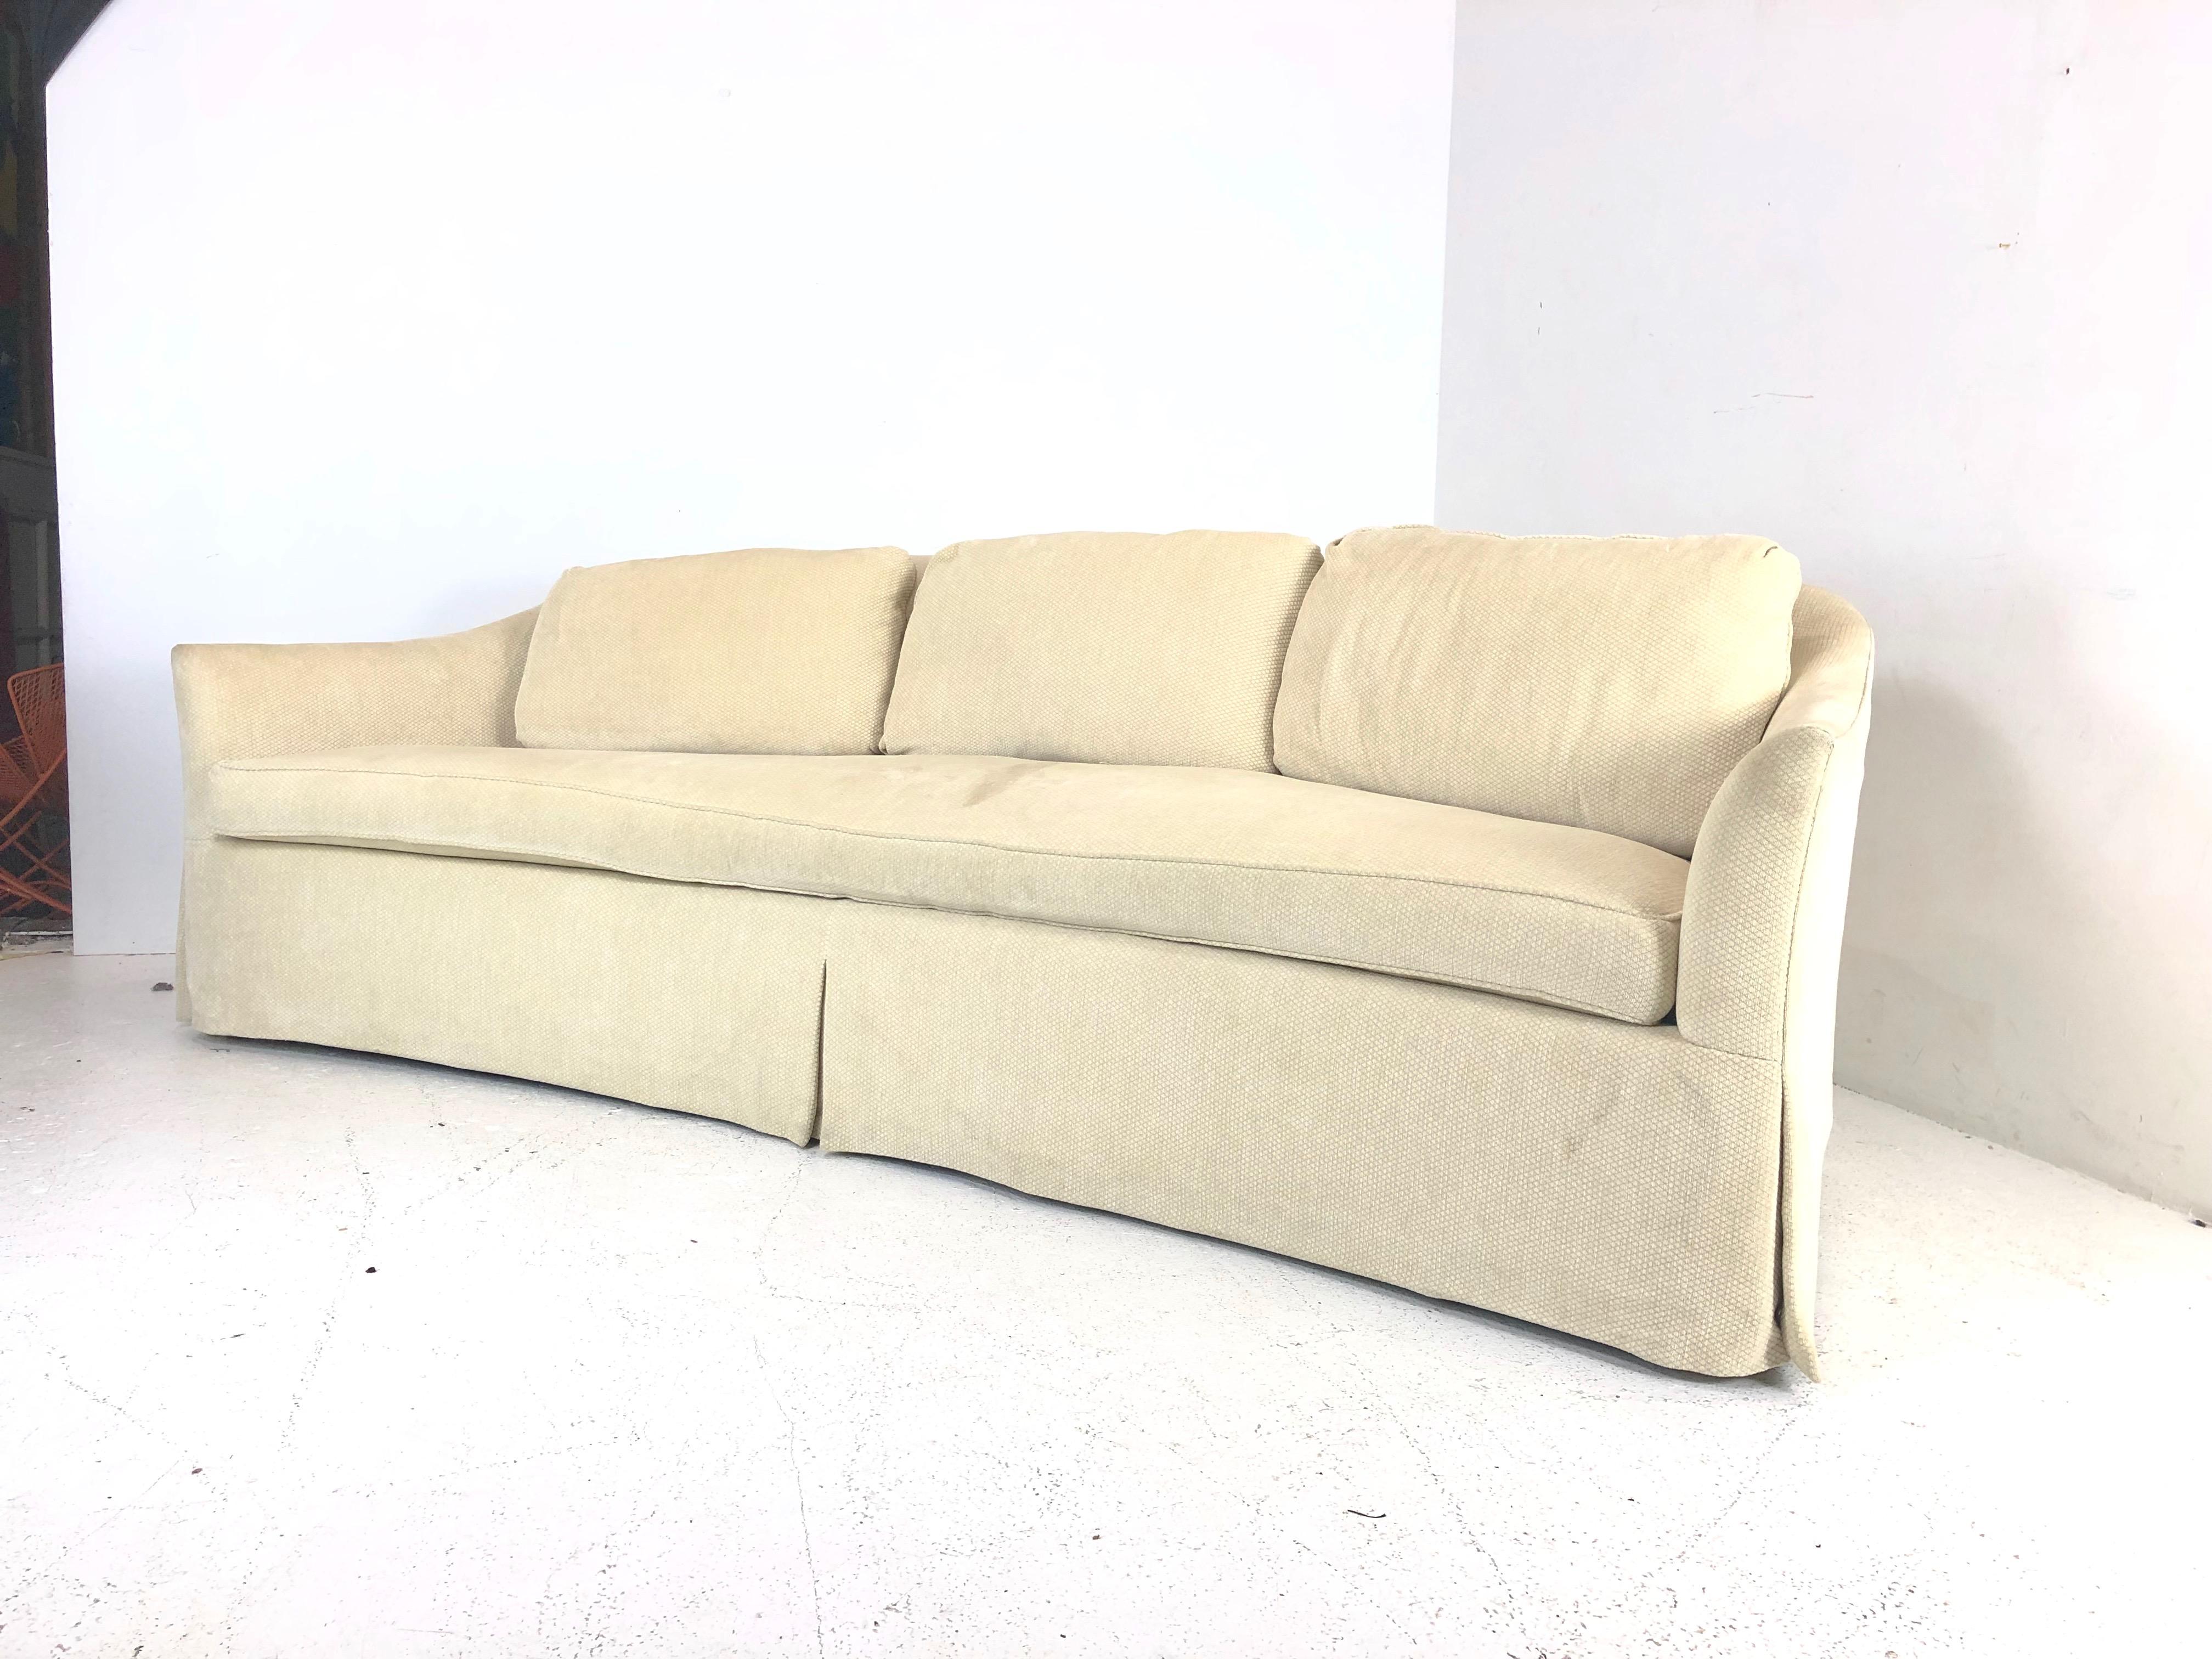 The 2719 curved sofa by A. Rudin. The sofa is sturdy and structurally sound and in good condition. Although in good condition new upholstery is suggested.

Dimensions:
97 W x 43 D x 32 H
Seat height 20.